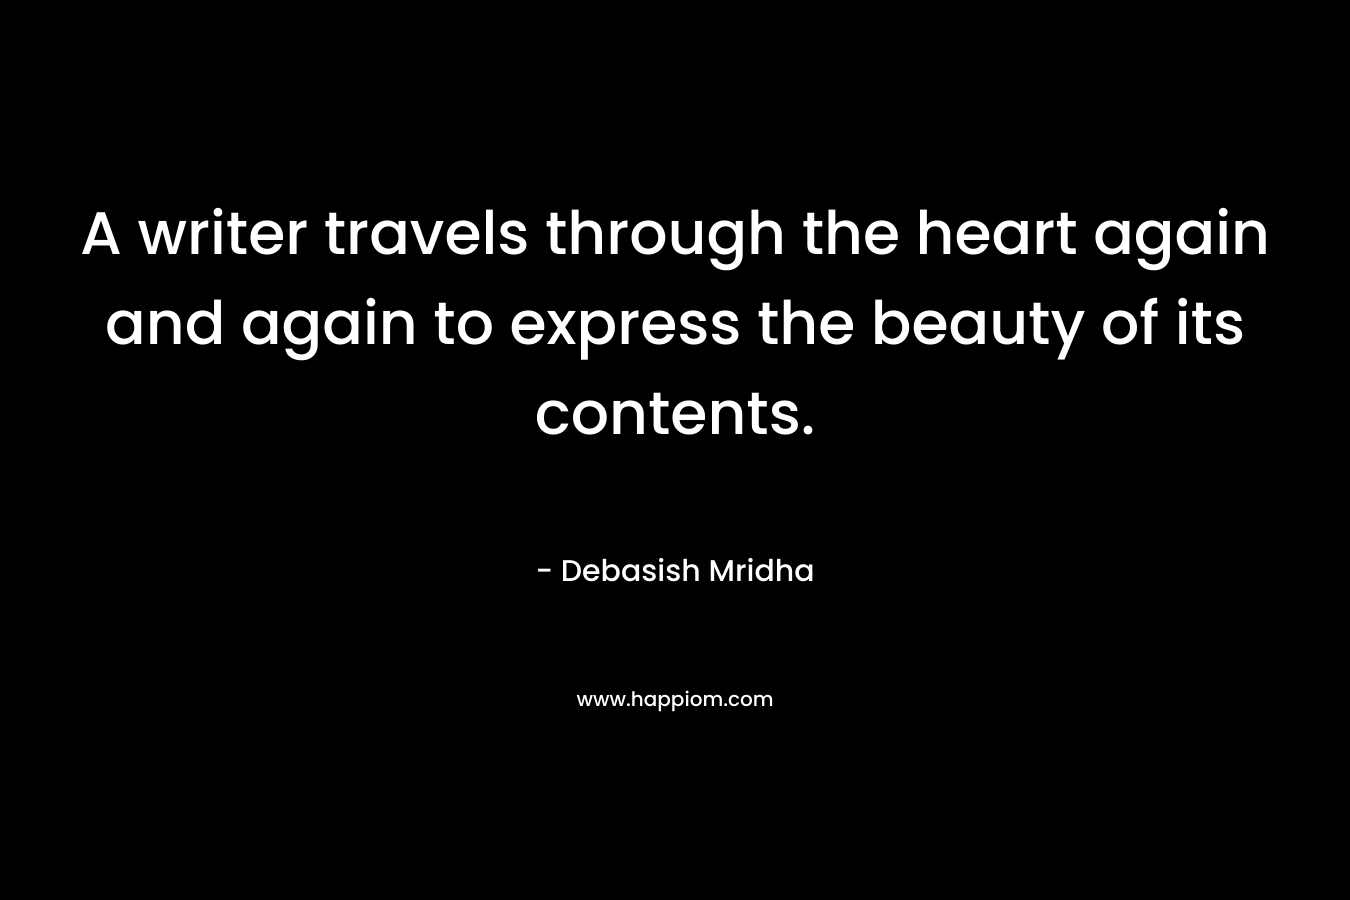 A writer travels through the heart again and again to express the beauty of its contents.